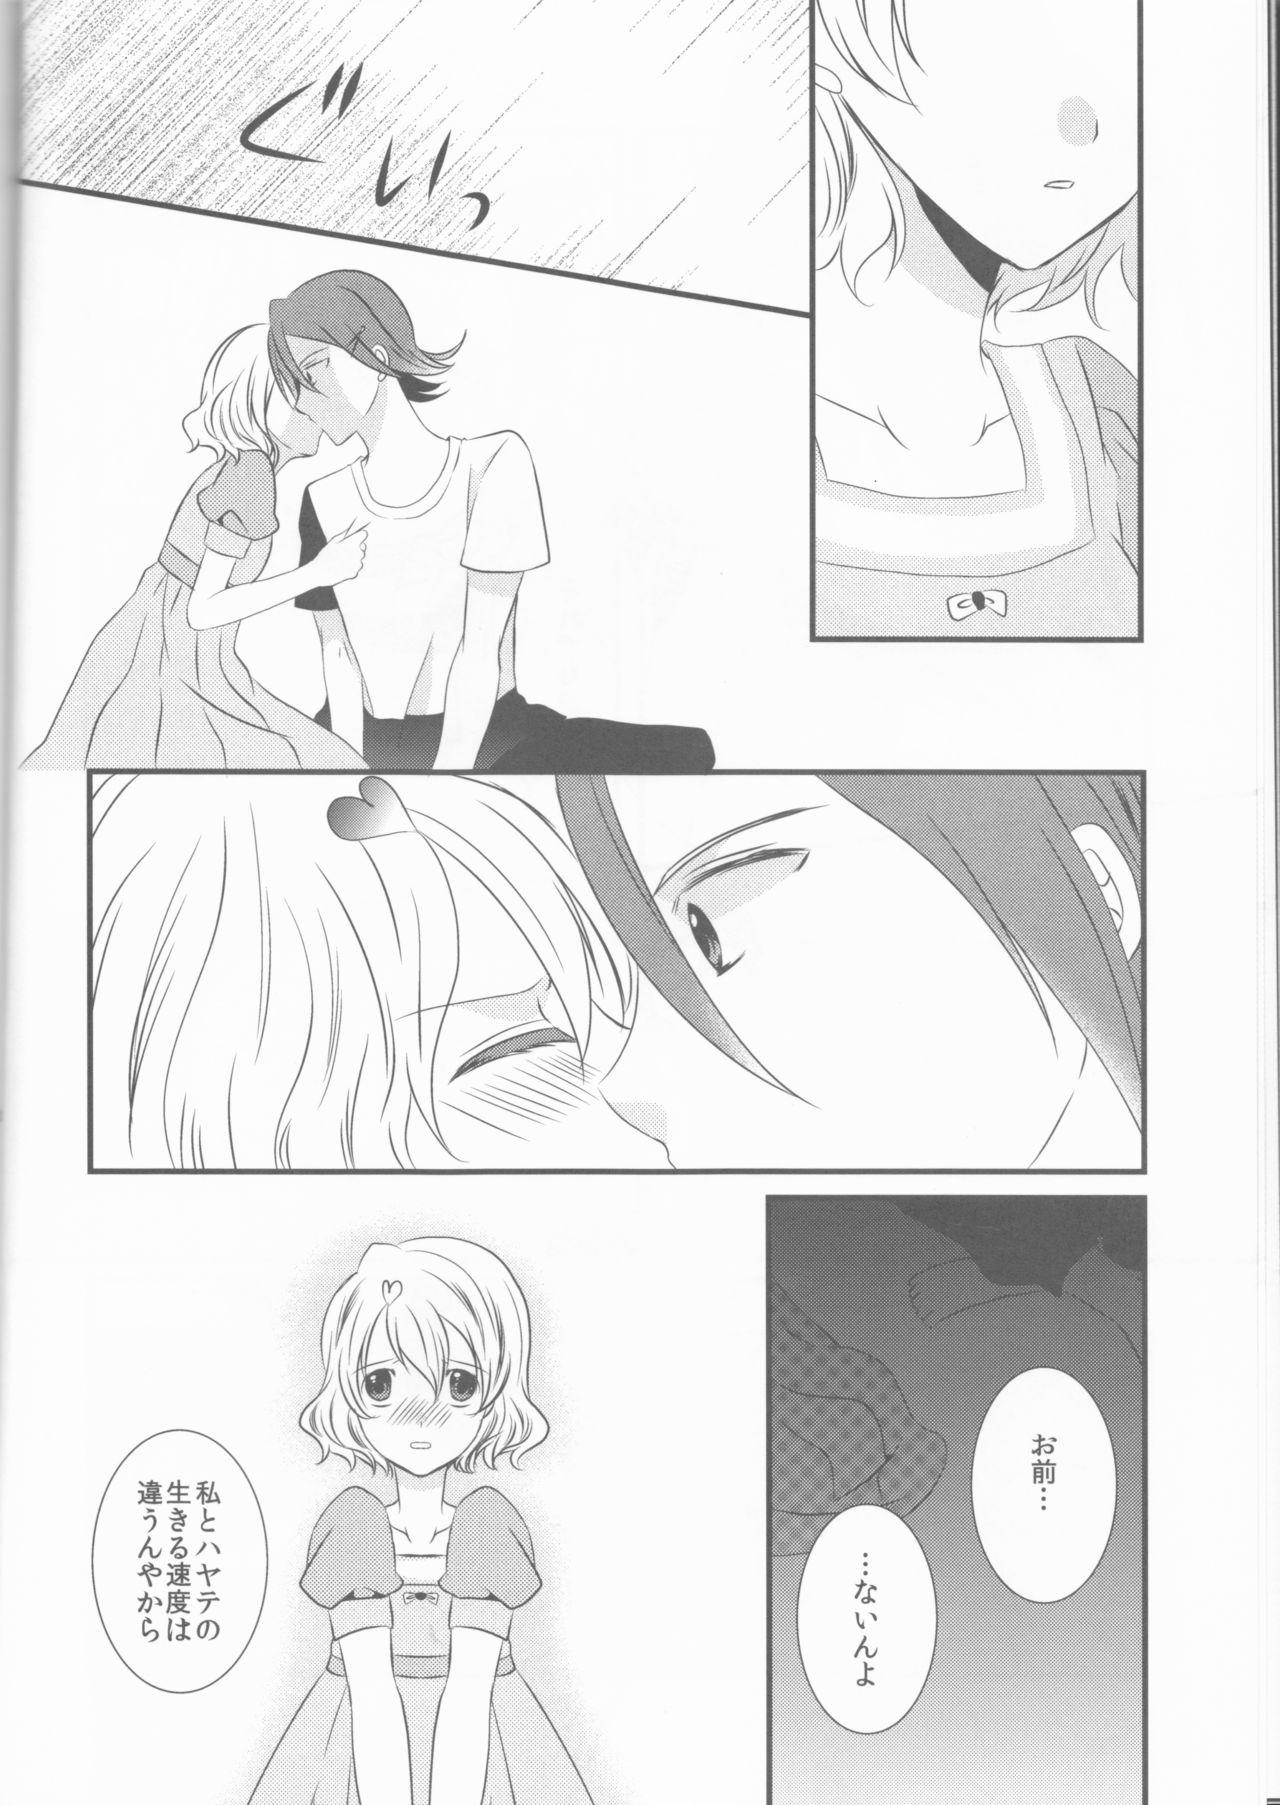 Porno one's love - Macross delta Gay Pissing - Page 7